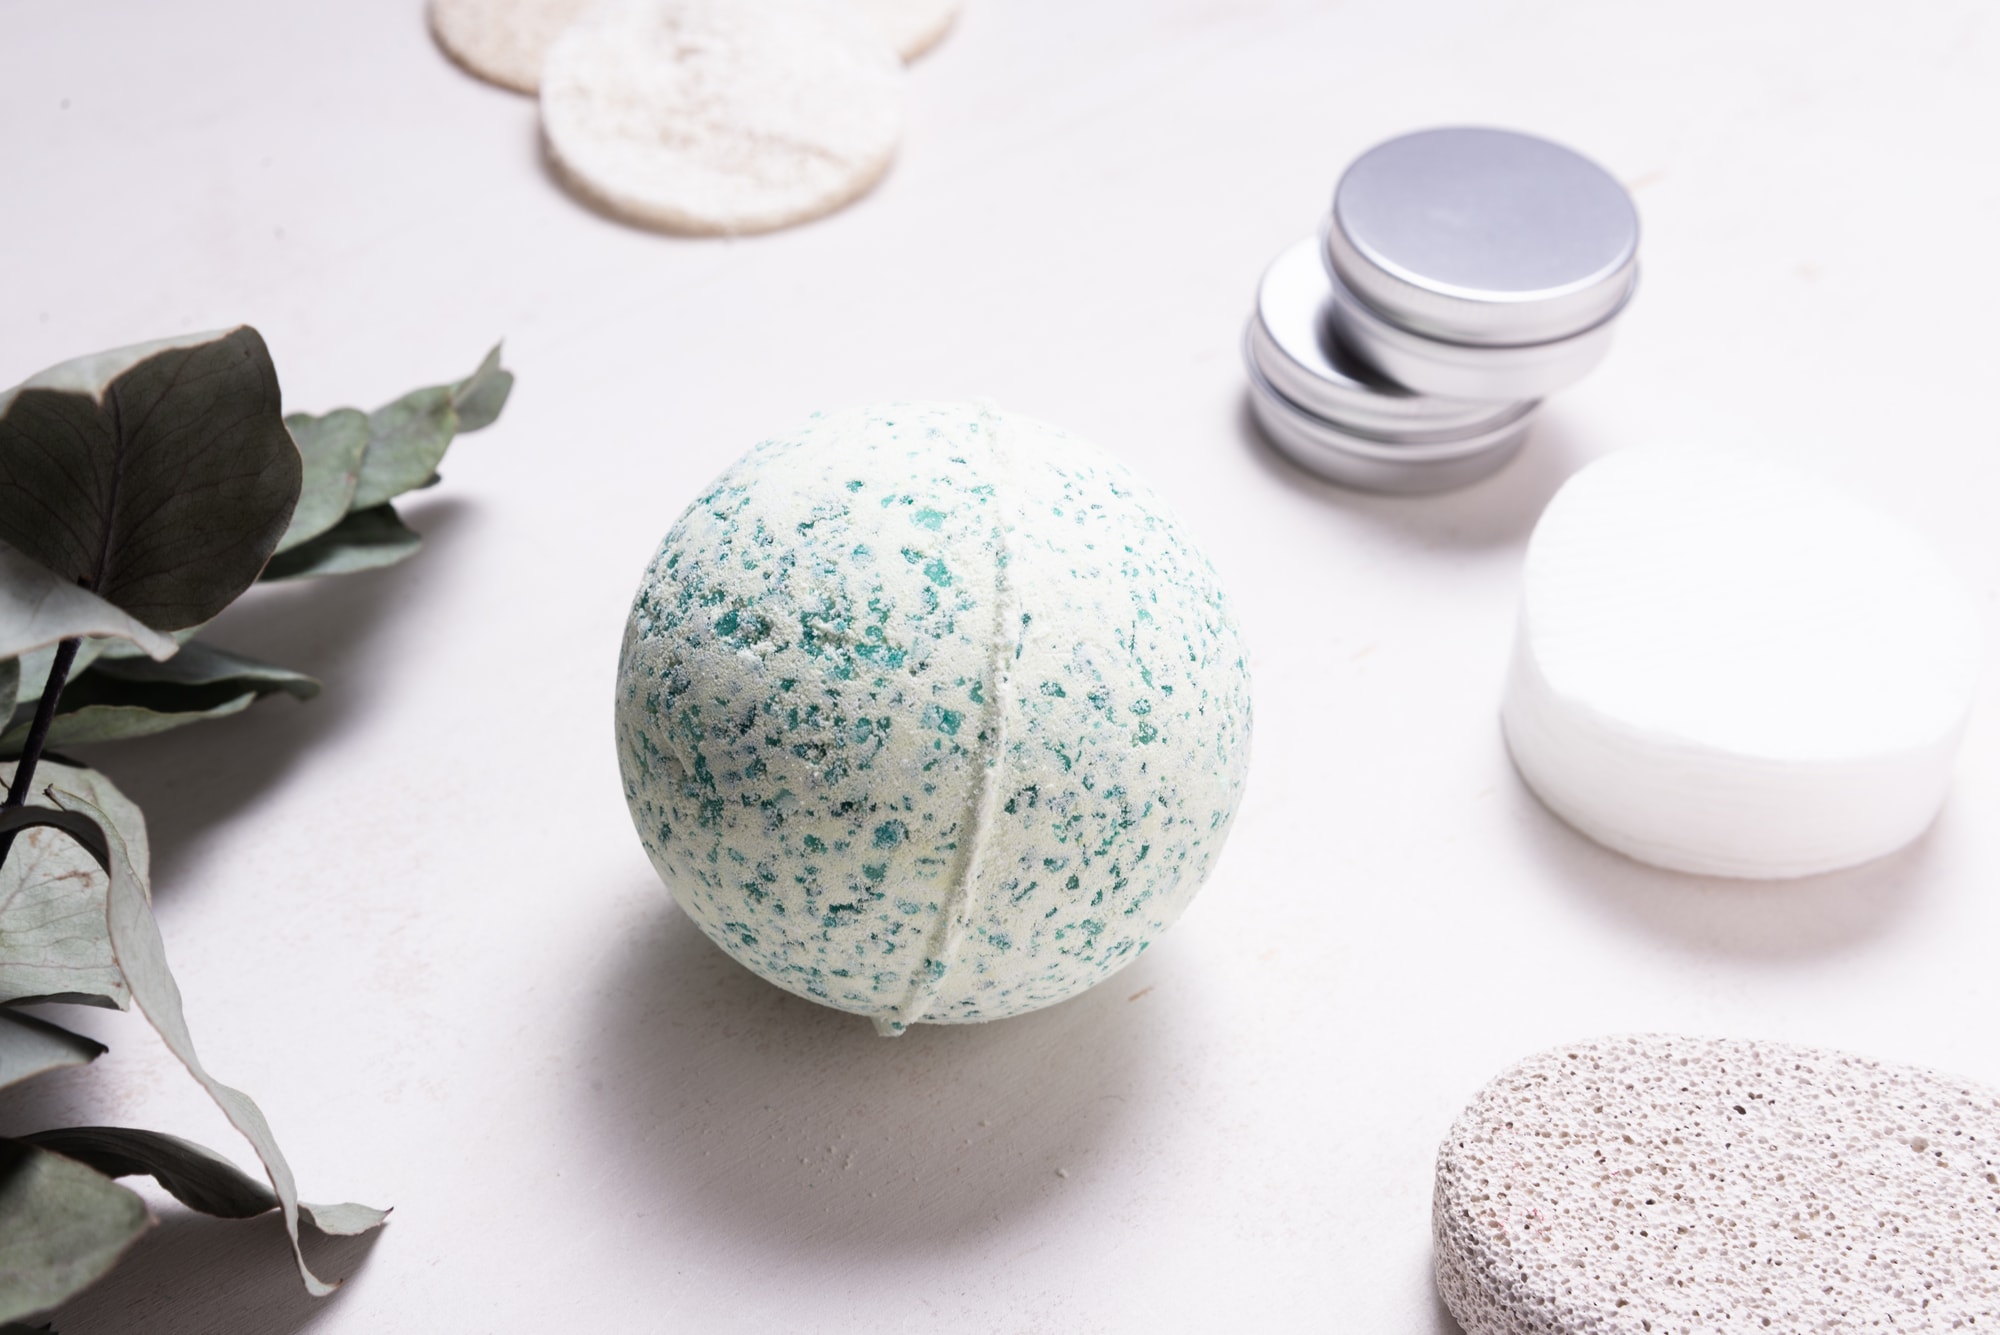 Are bath bombs safe to use?